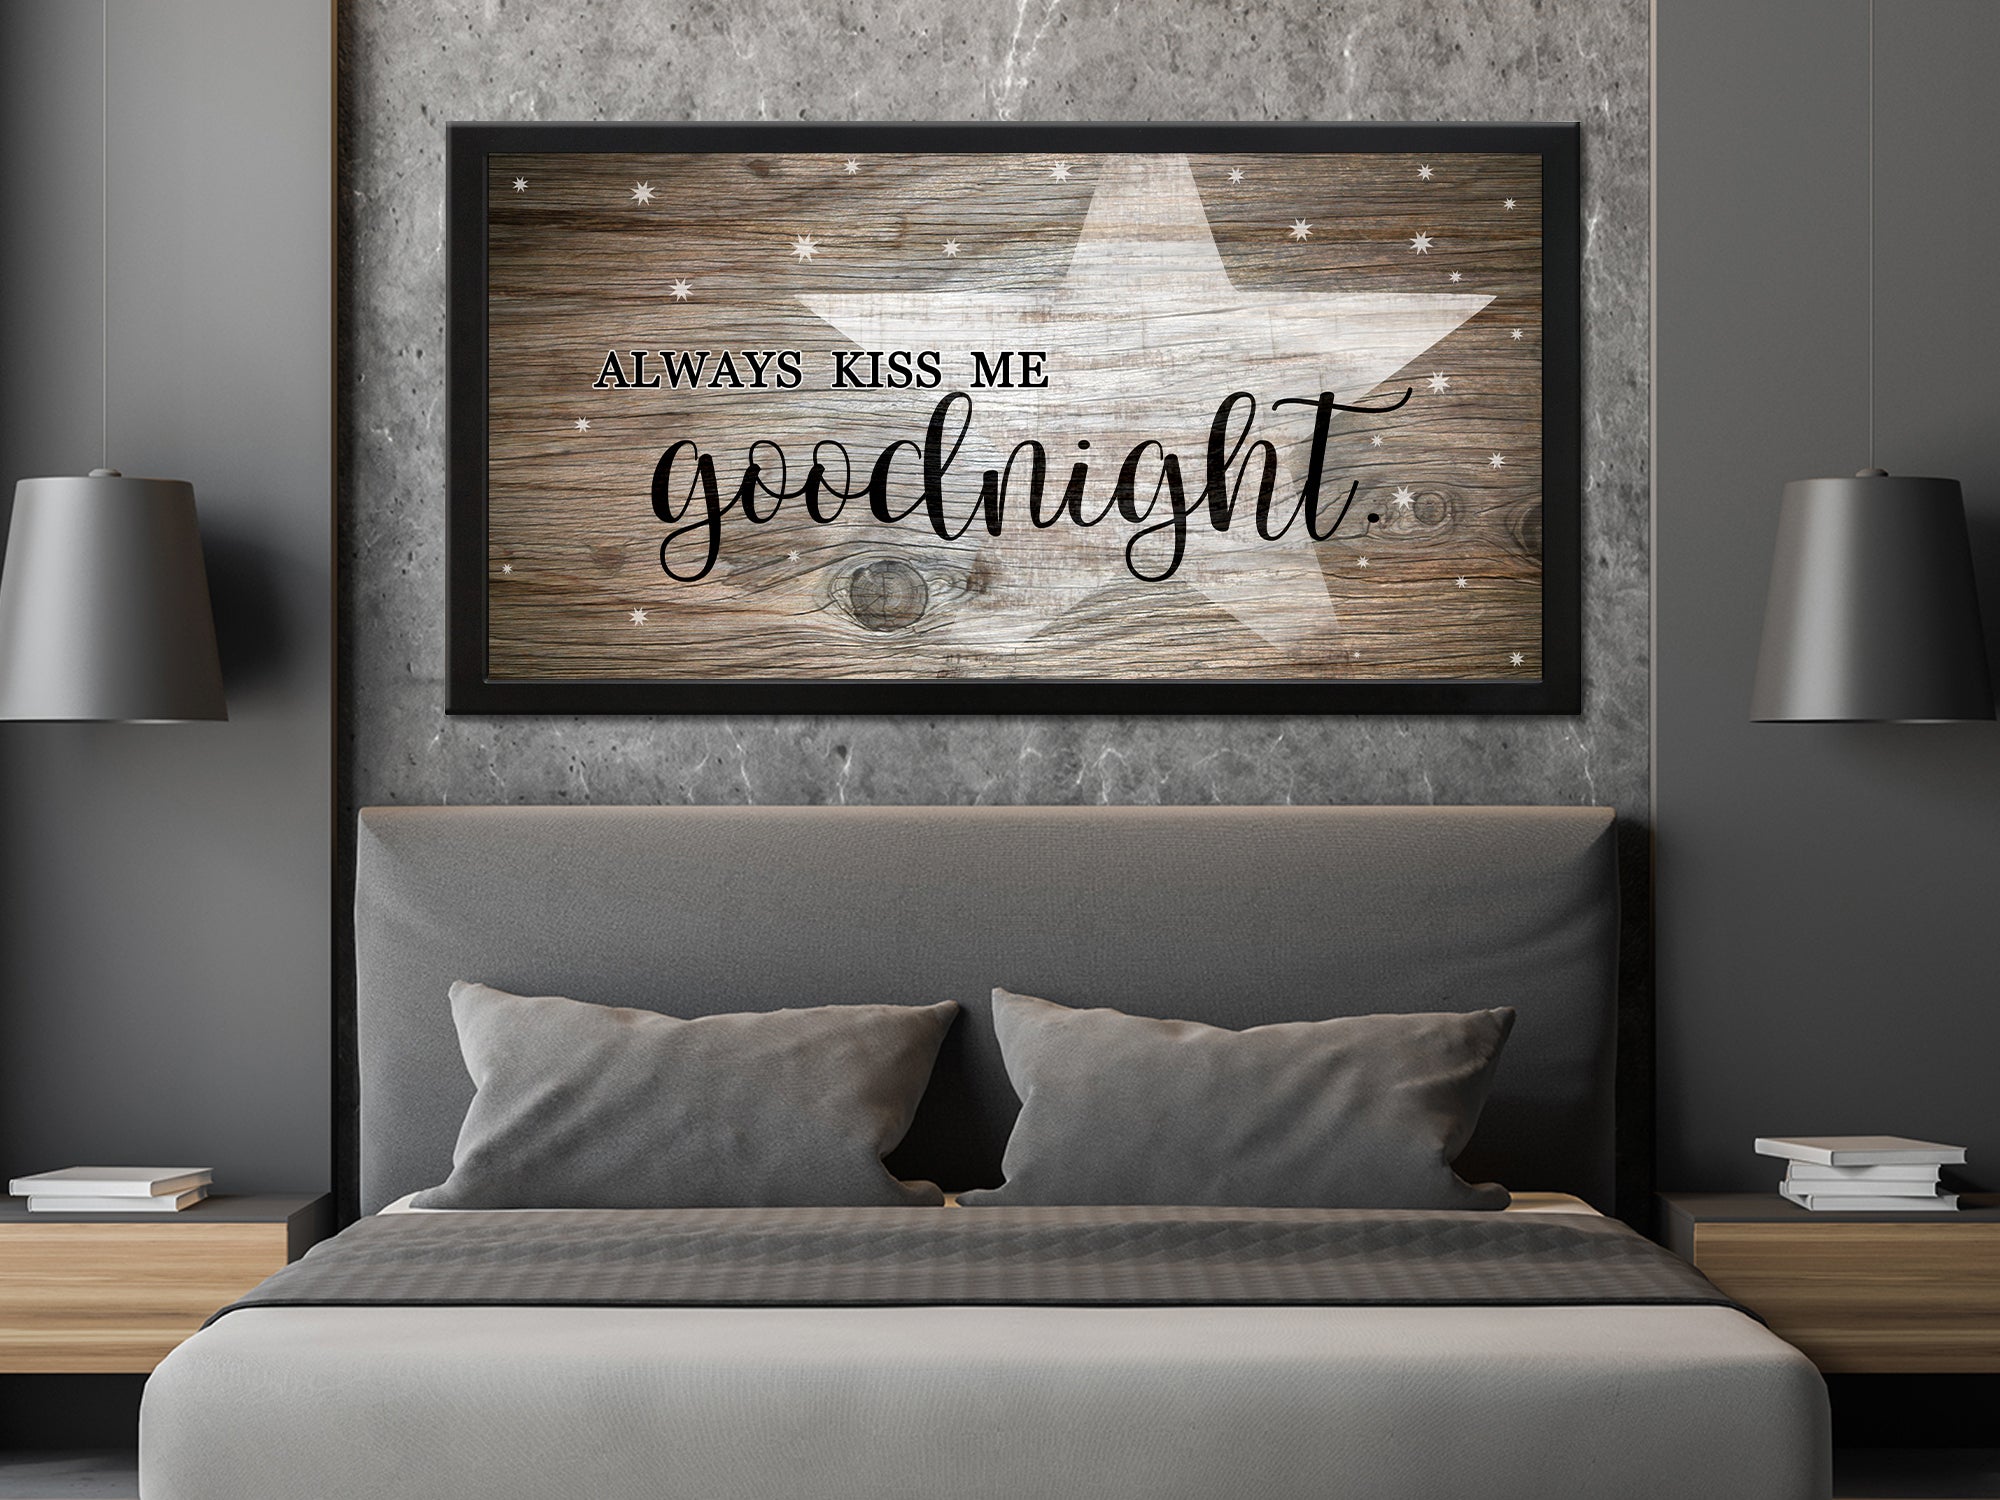 Always Kiss me at Goodnight - Bedroom Canvas Wall Art